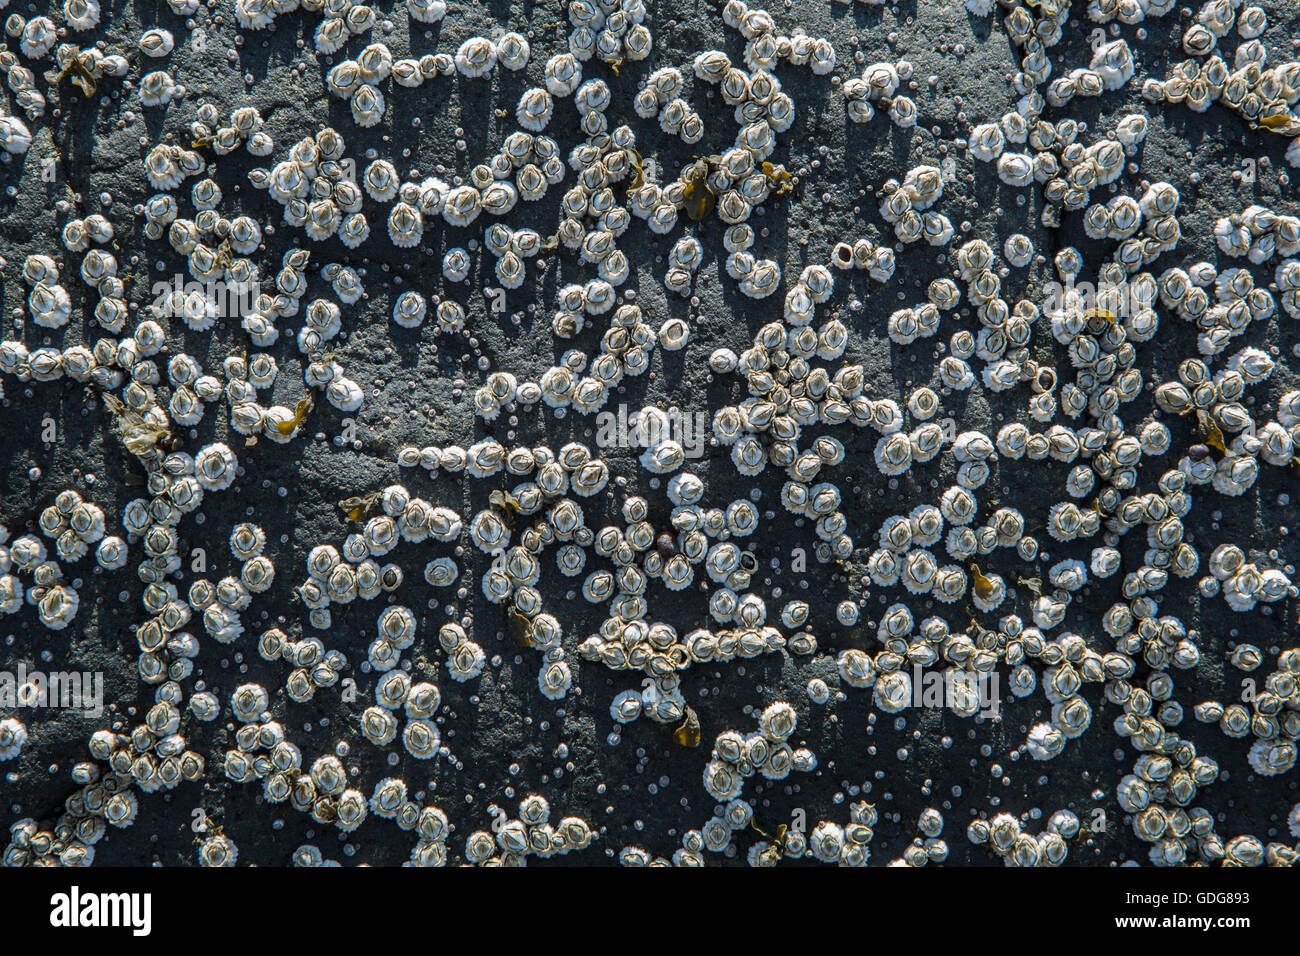 Barnacles on a rock Stock Photo